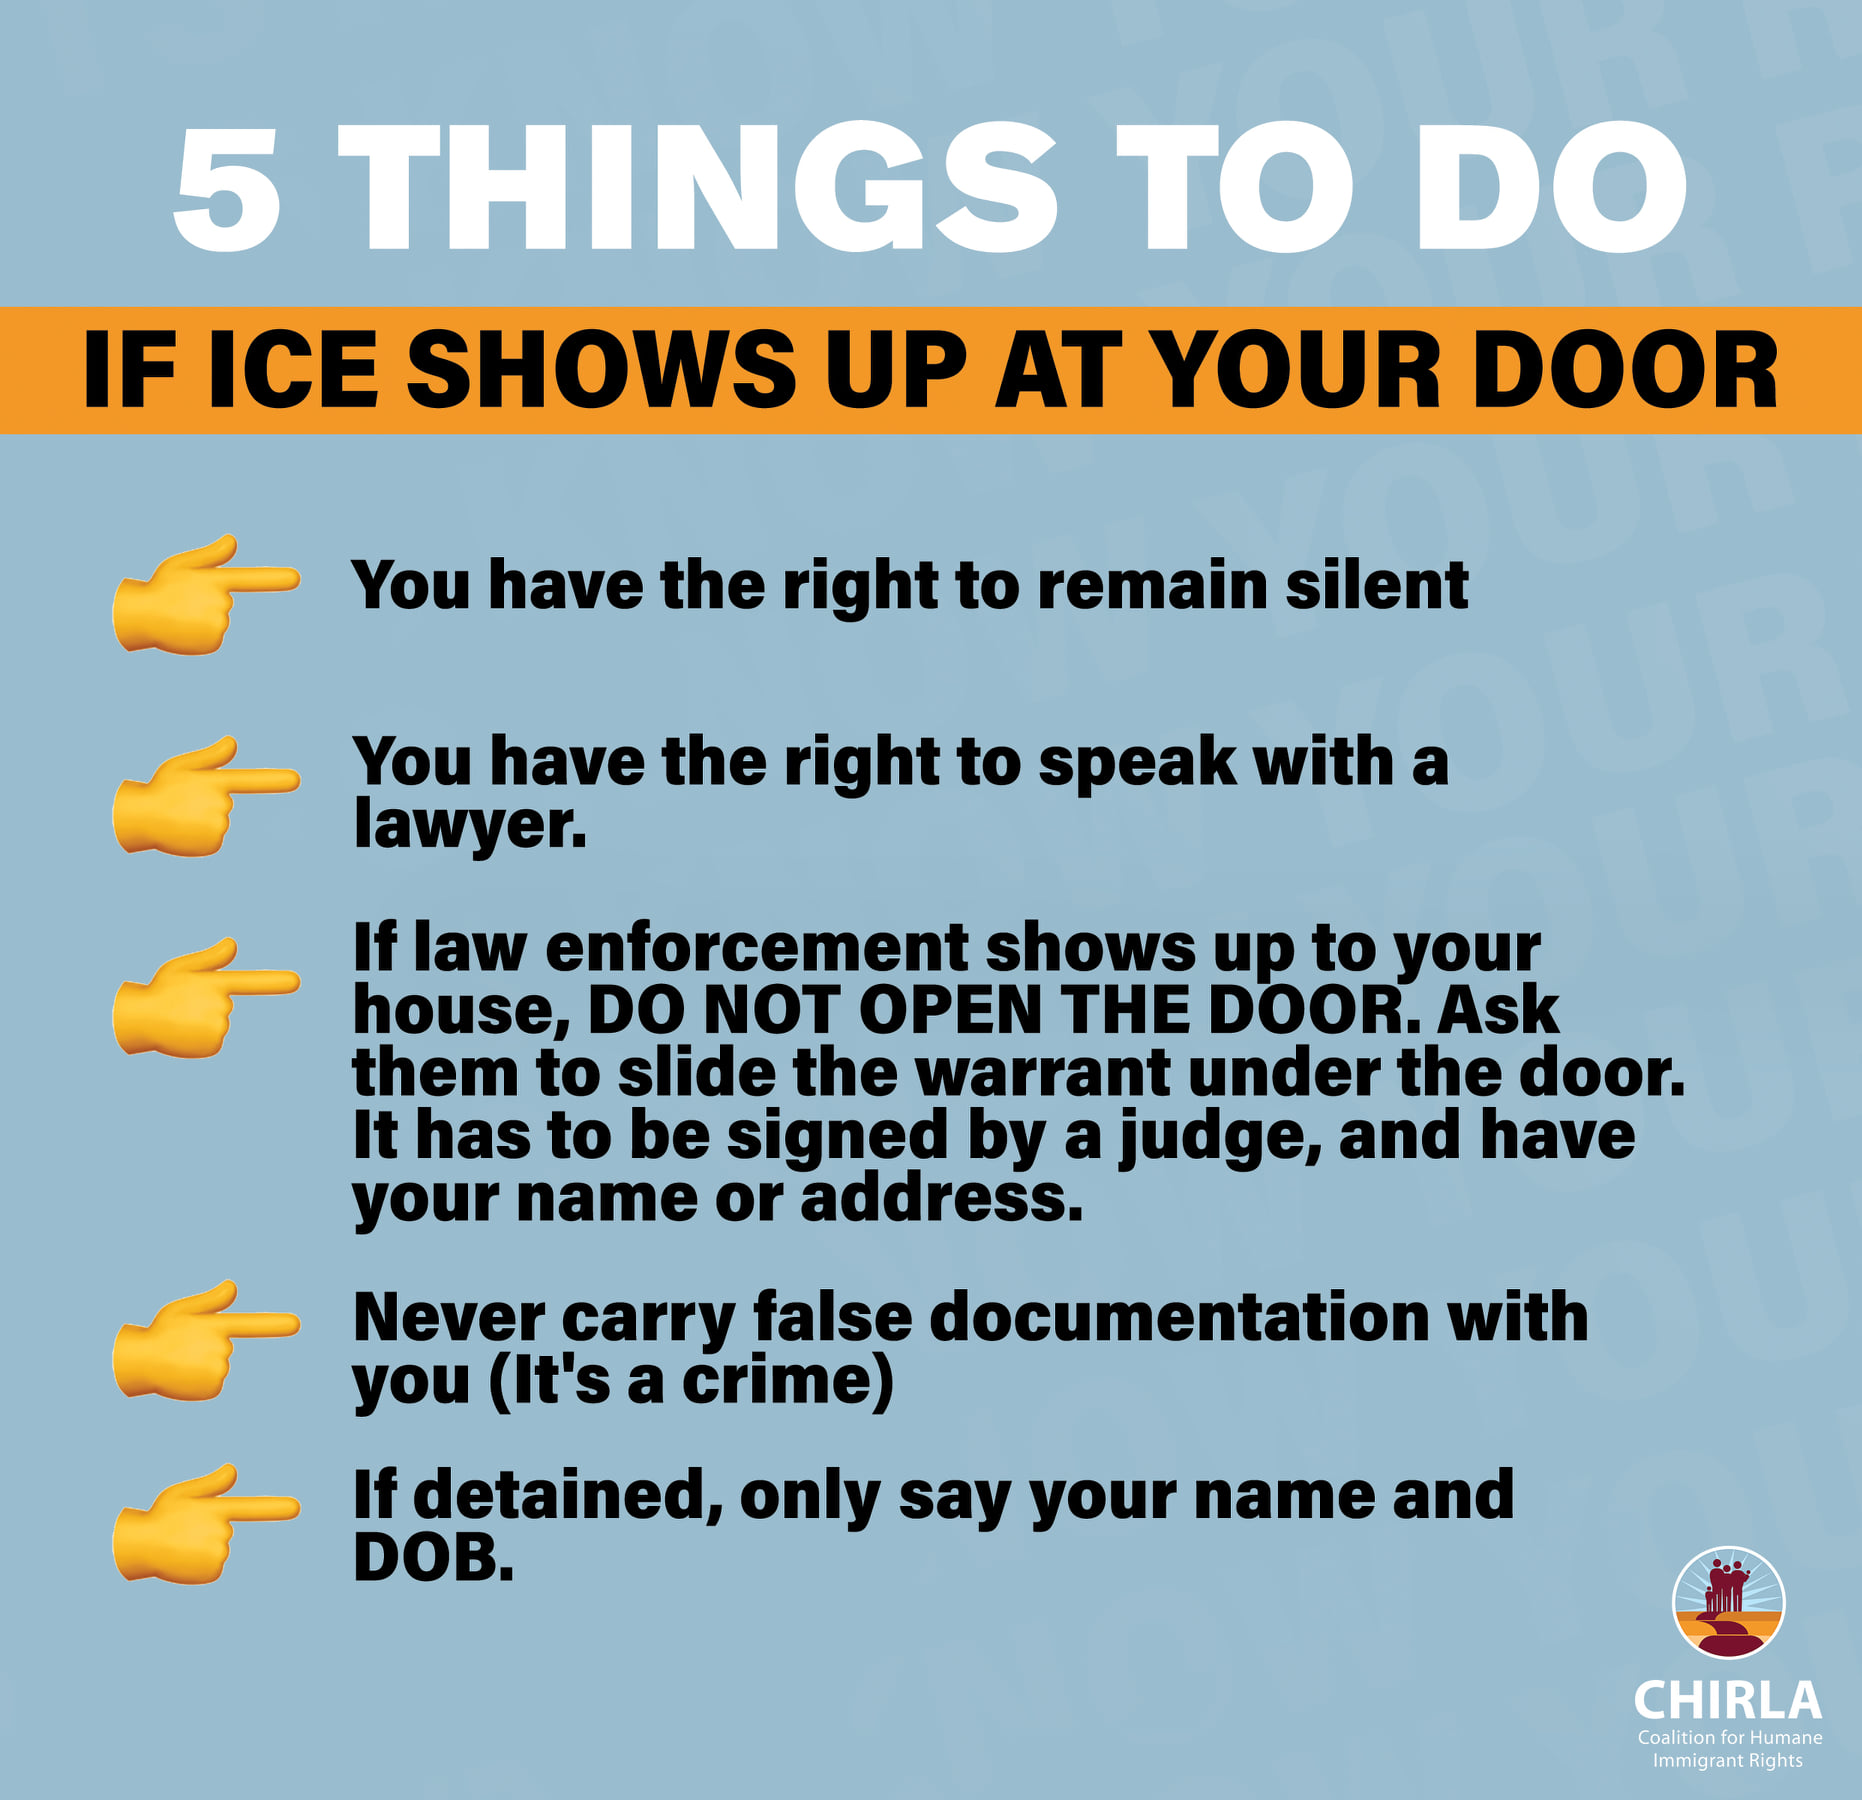 5 things to do if ICE shows up at your door